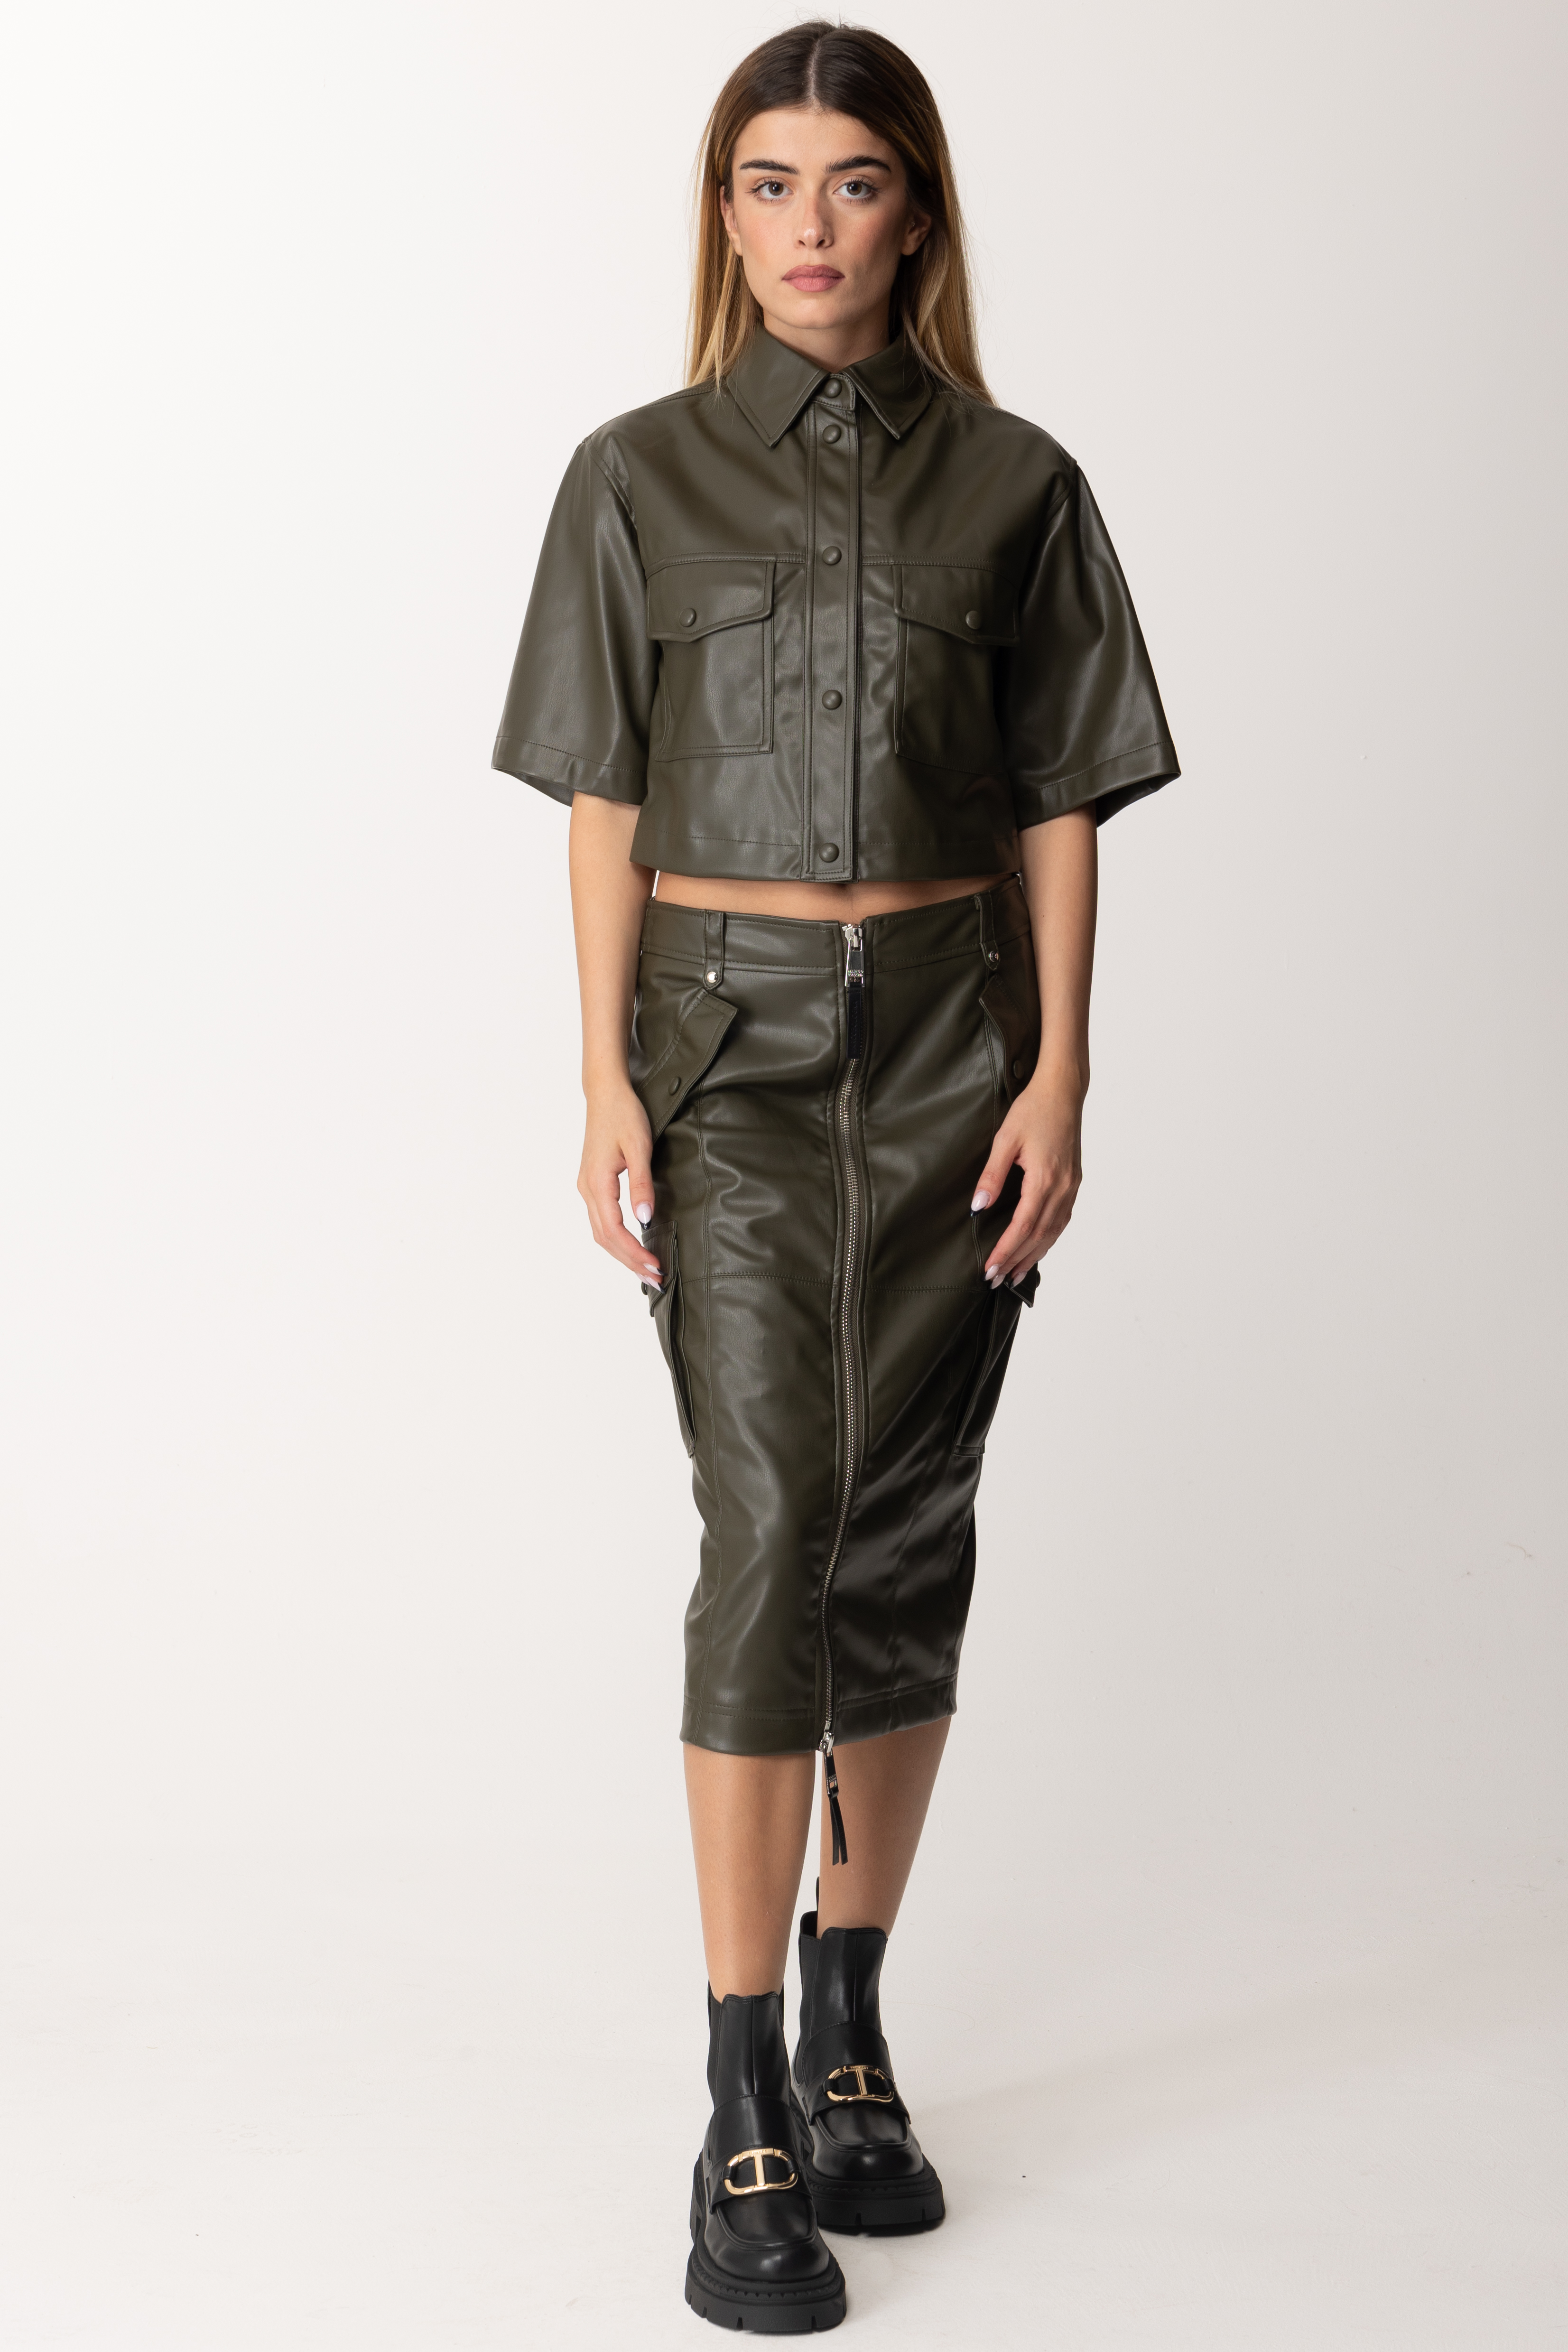 Preview: Marco Bologna Cropped leather shirt MILITARY